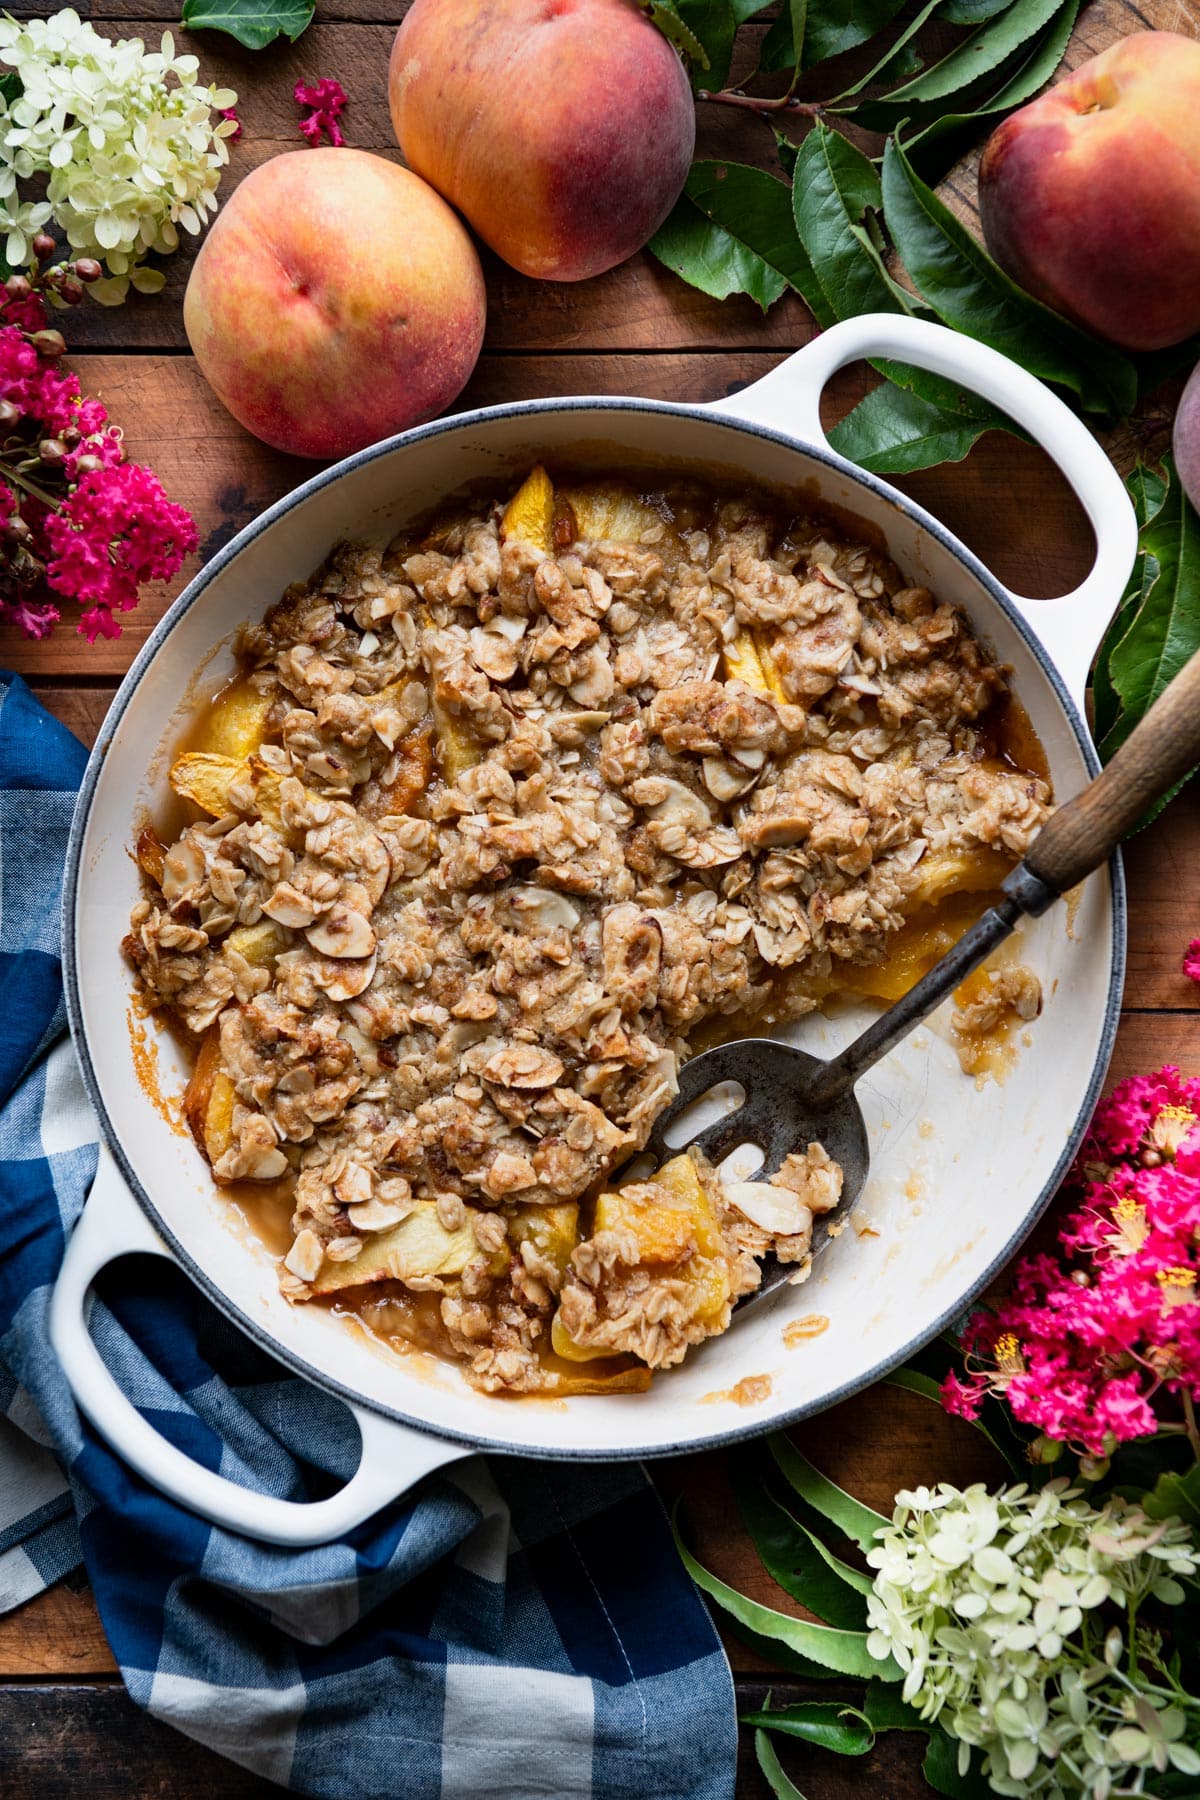 Peach crisp in a cast iron skillet on a wooden table with flowers around the border.